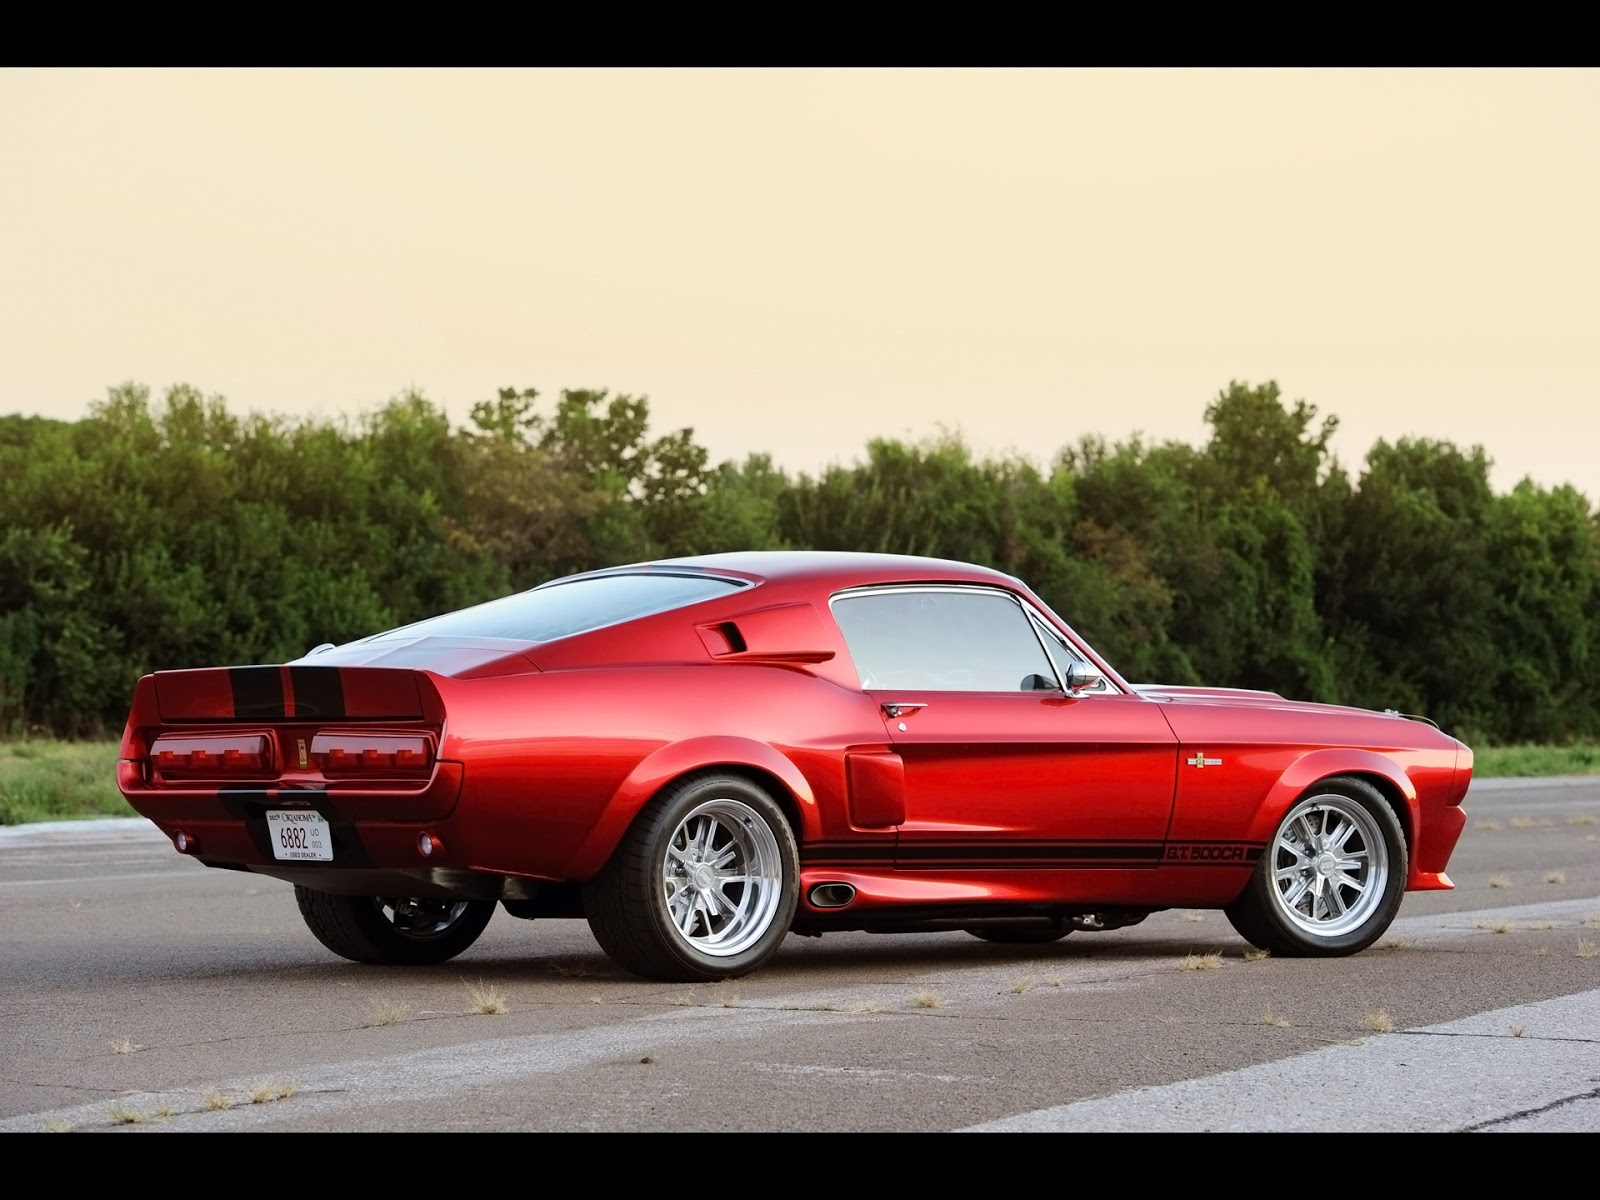 HD Wallpapers Collection: american muscle cars wallpaper